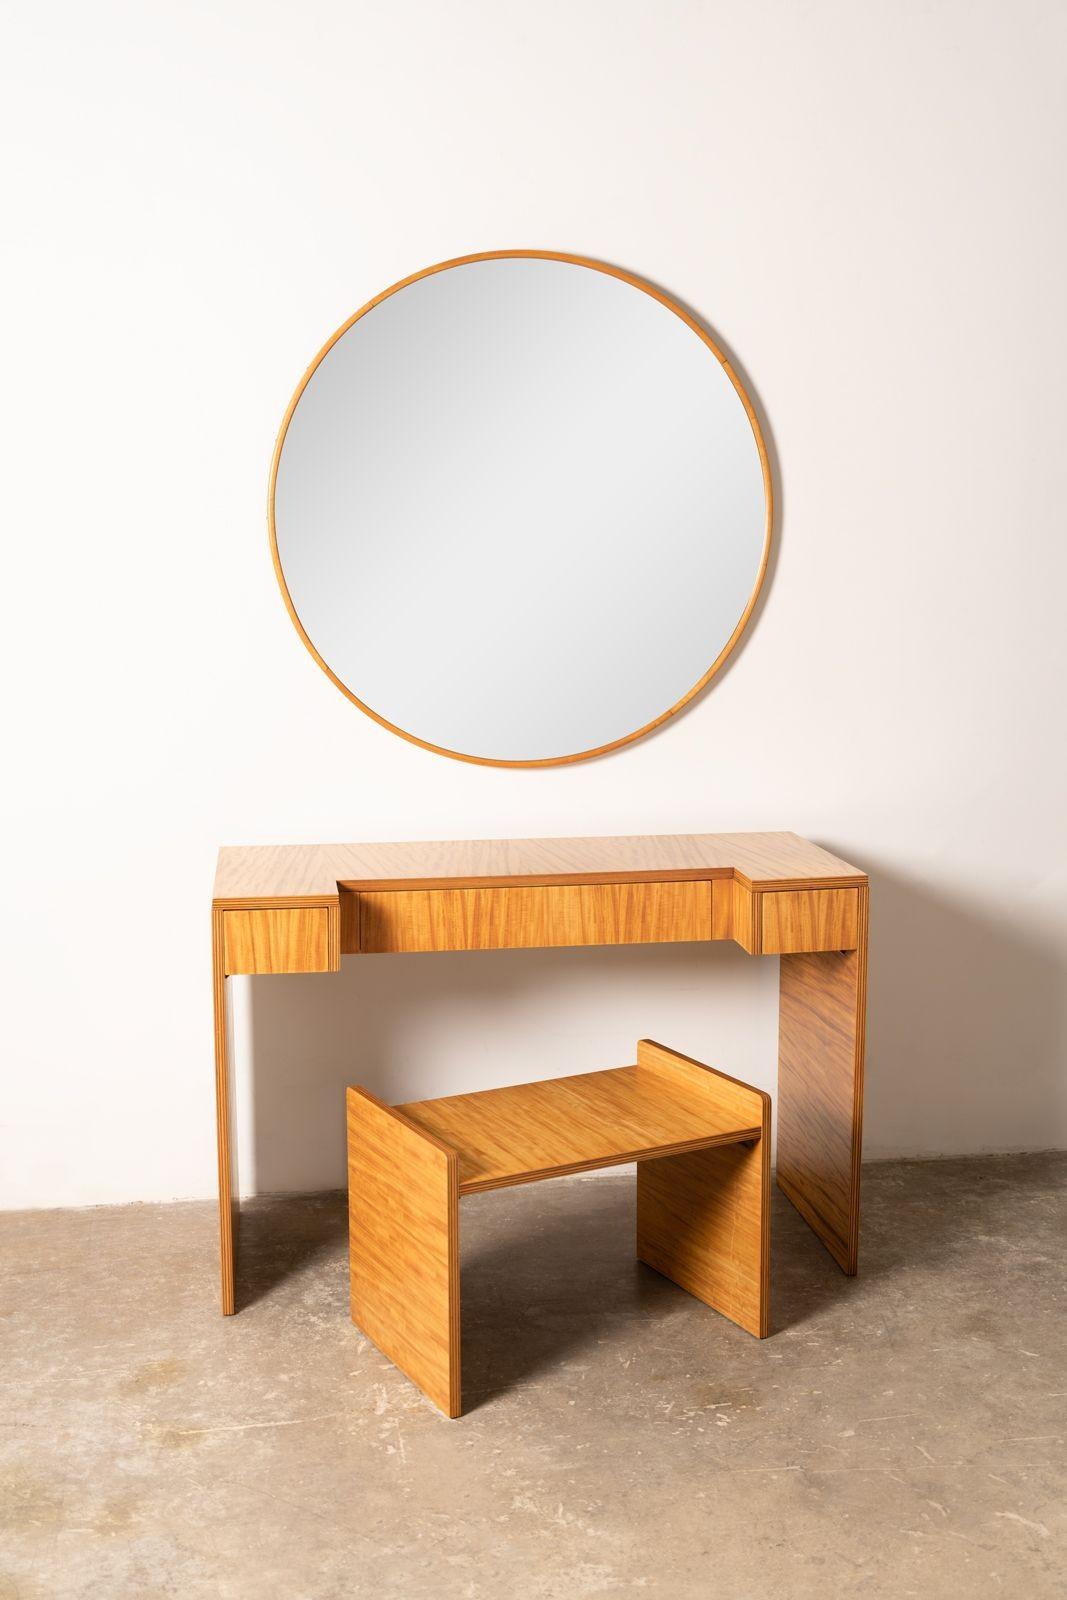 Extraordinary vanity table with mirror and stool crafted from highly figured ribbon Avodire wood. Created by the Holland Furniture Company in the 1940s. Donald Deskey at this time was designing for the Baker furniture company which had just